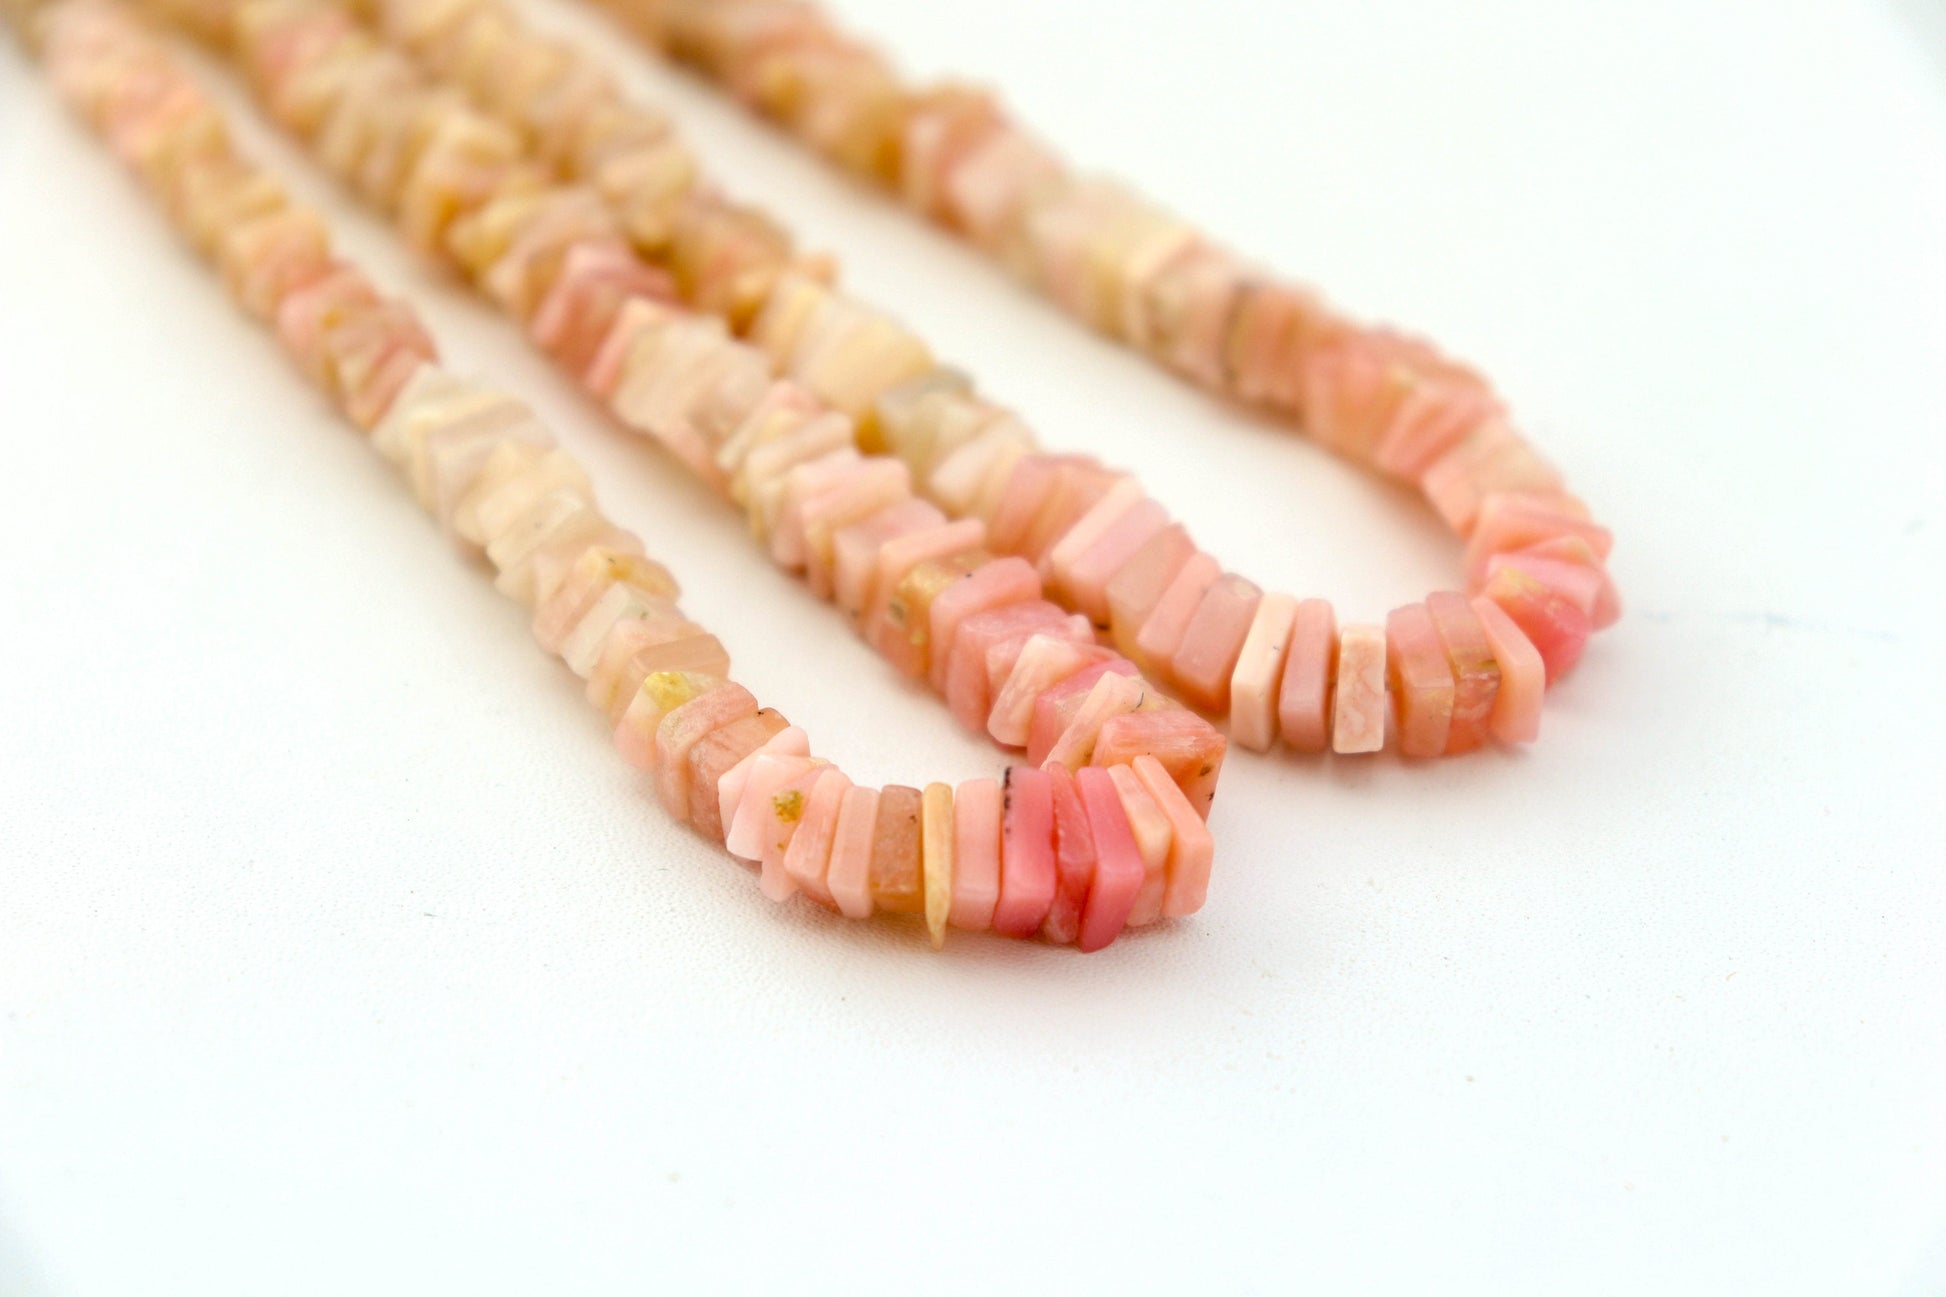 Pink Opal Beads Smooth Square shape Heishi beads, 6mm, Pink opal beads,  Opal Gemstone beads for Jewelry making 16 inch long Beadsforyourjewelry